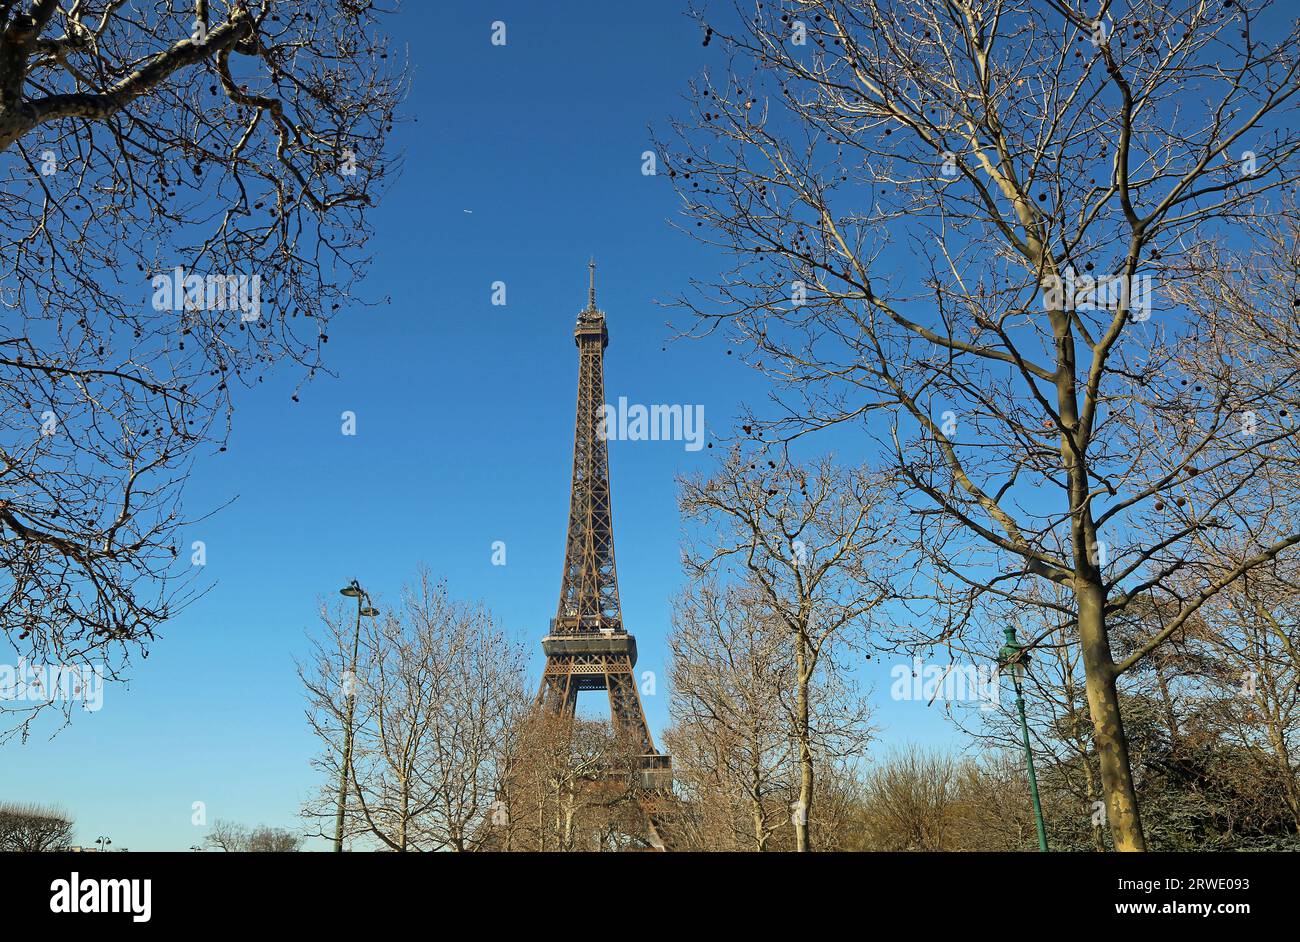 Landscape with Eiffel Tower and trees - Paris, France Stock Photo